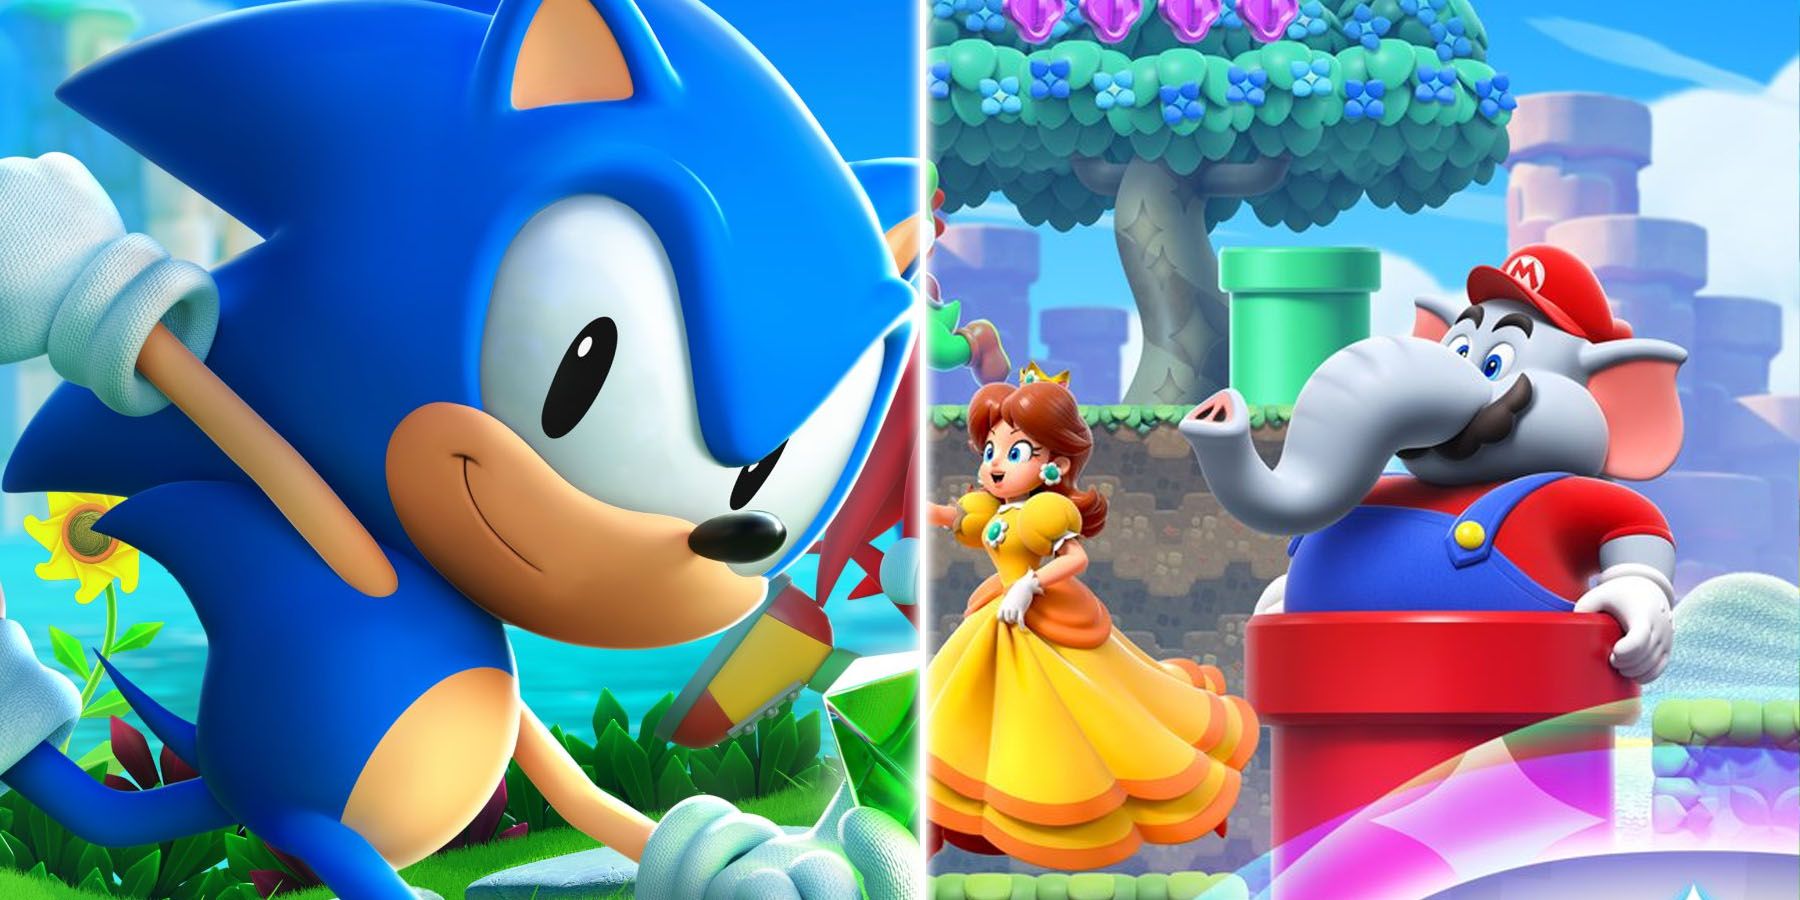 Sega Producer Comments on Sonic Mario Bros. as Launching Week Same Super the Superstars Wonder